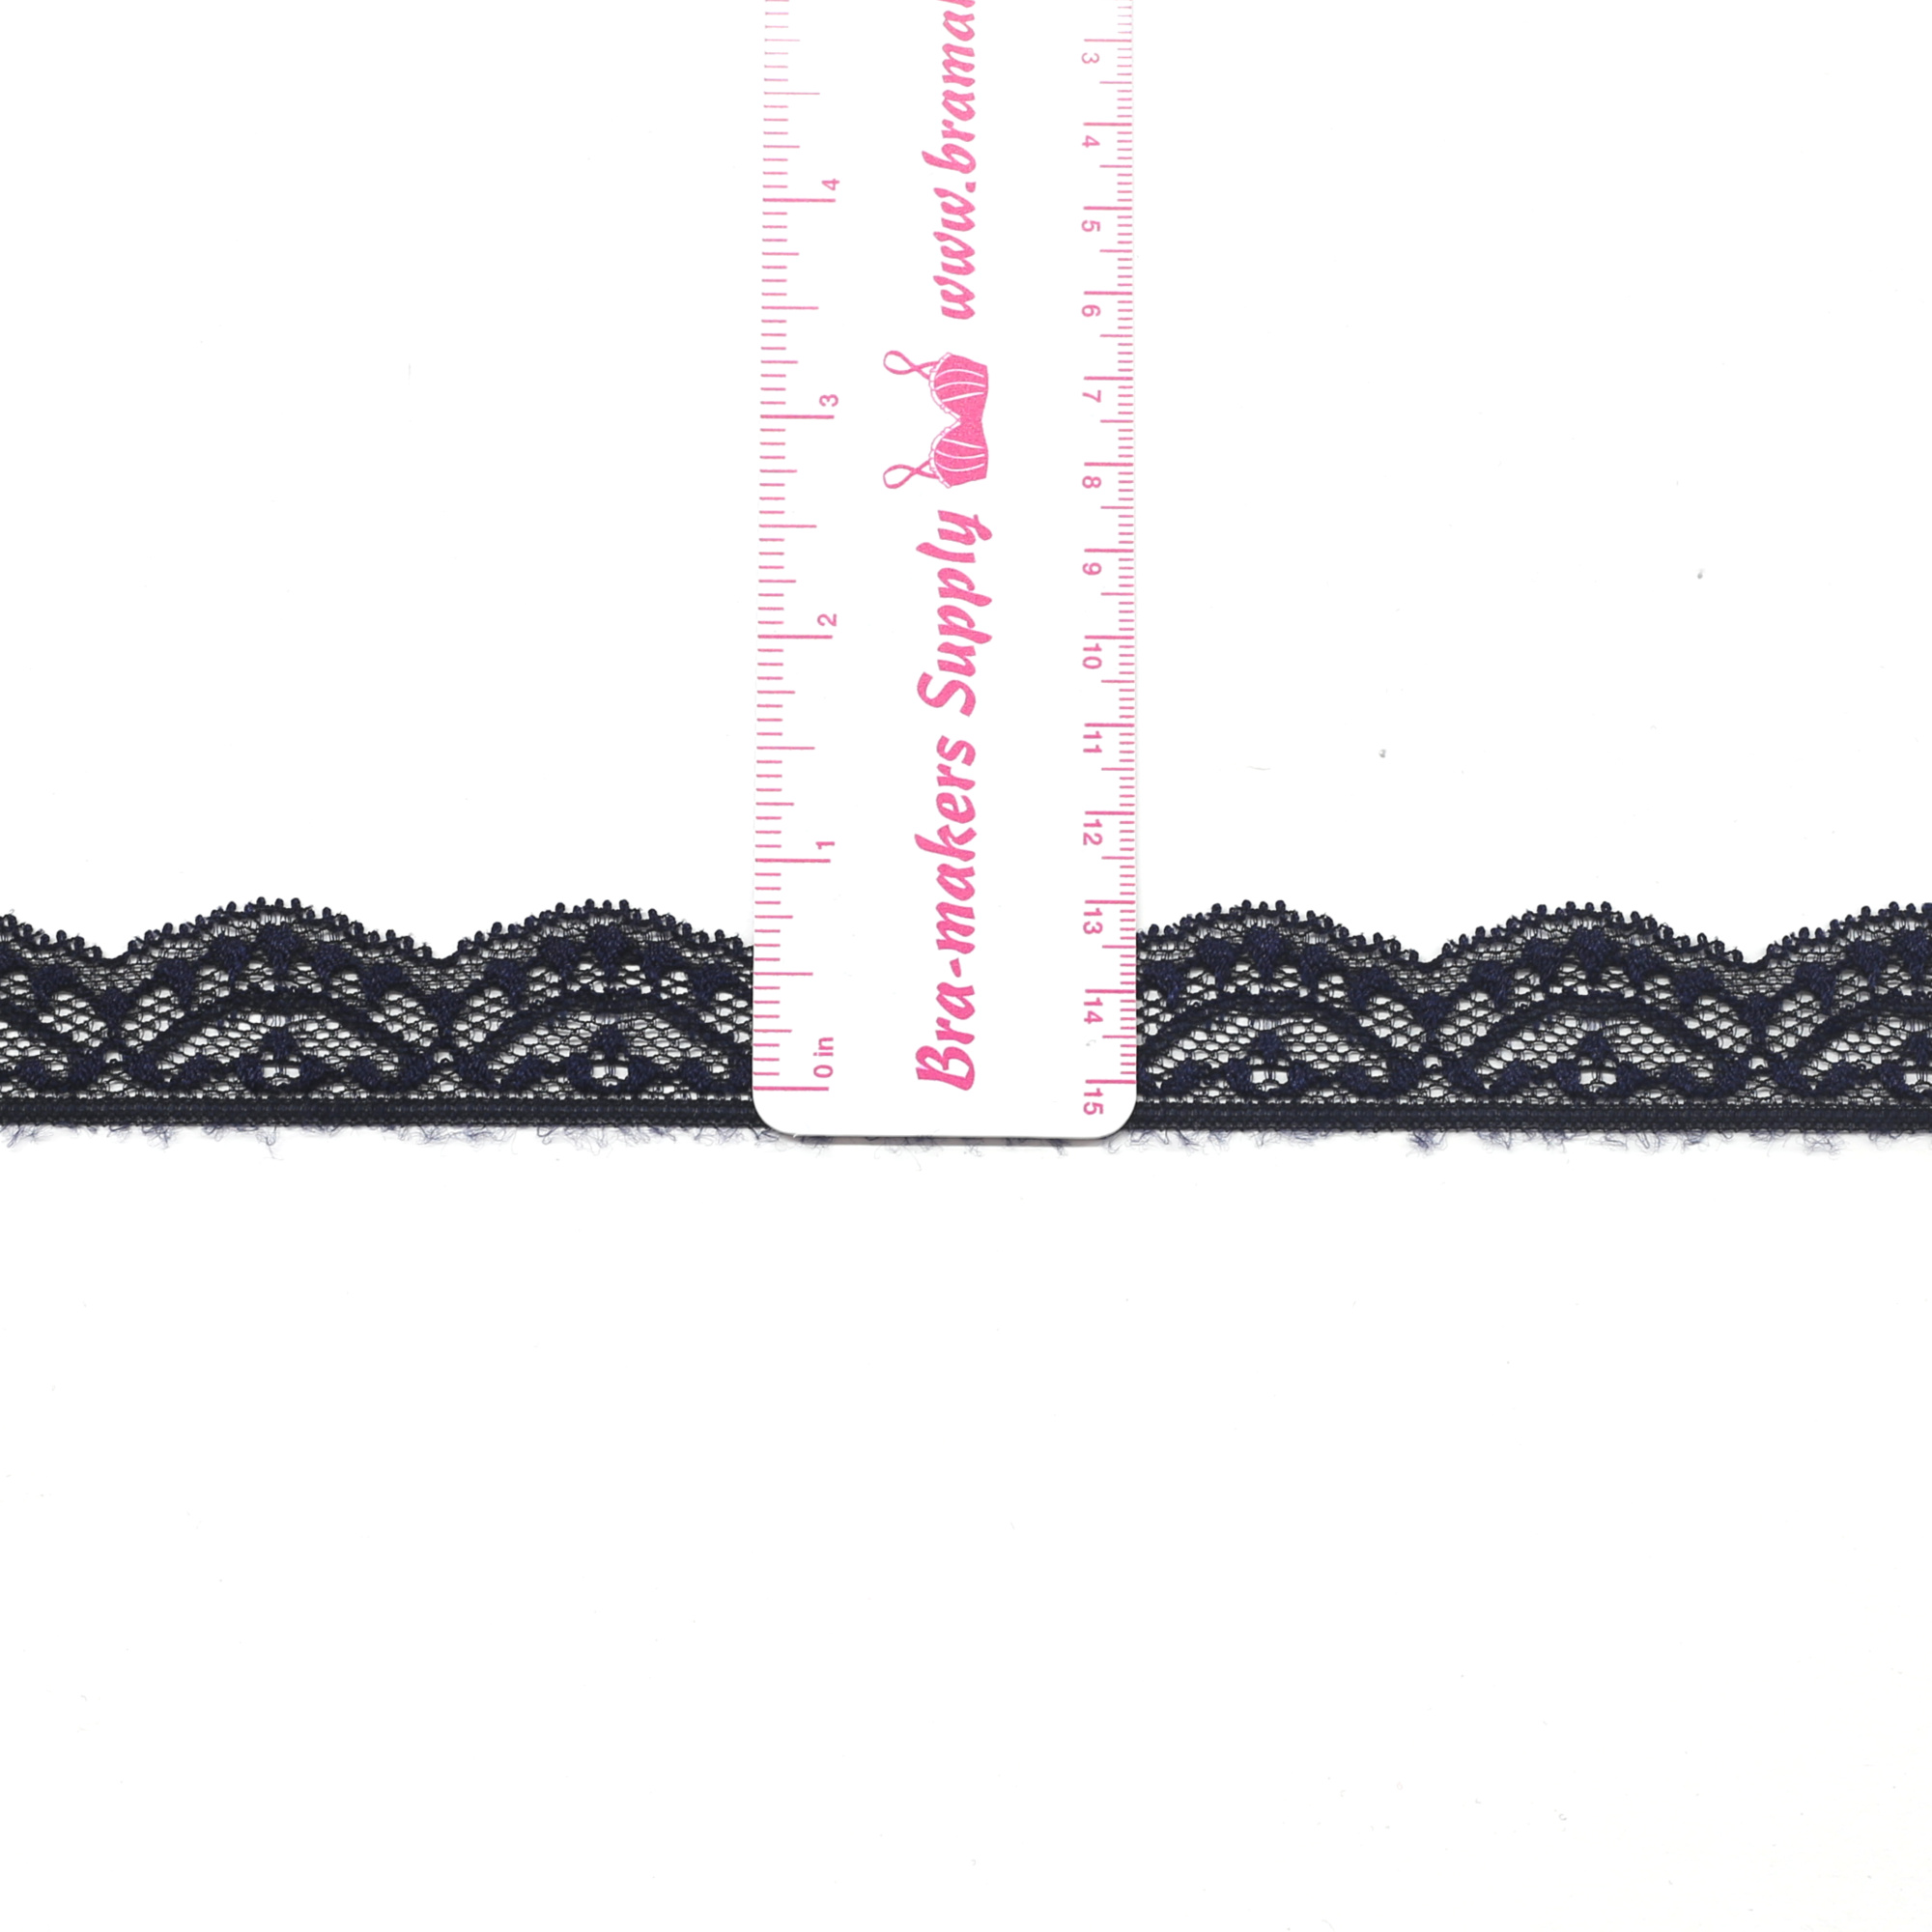 One Inch Navy Stretch Scalloped Lace Trim - Bra-Makers Supply